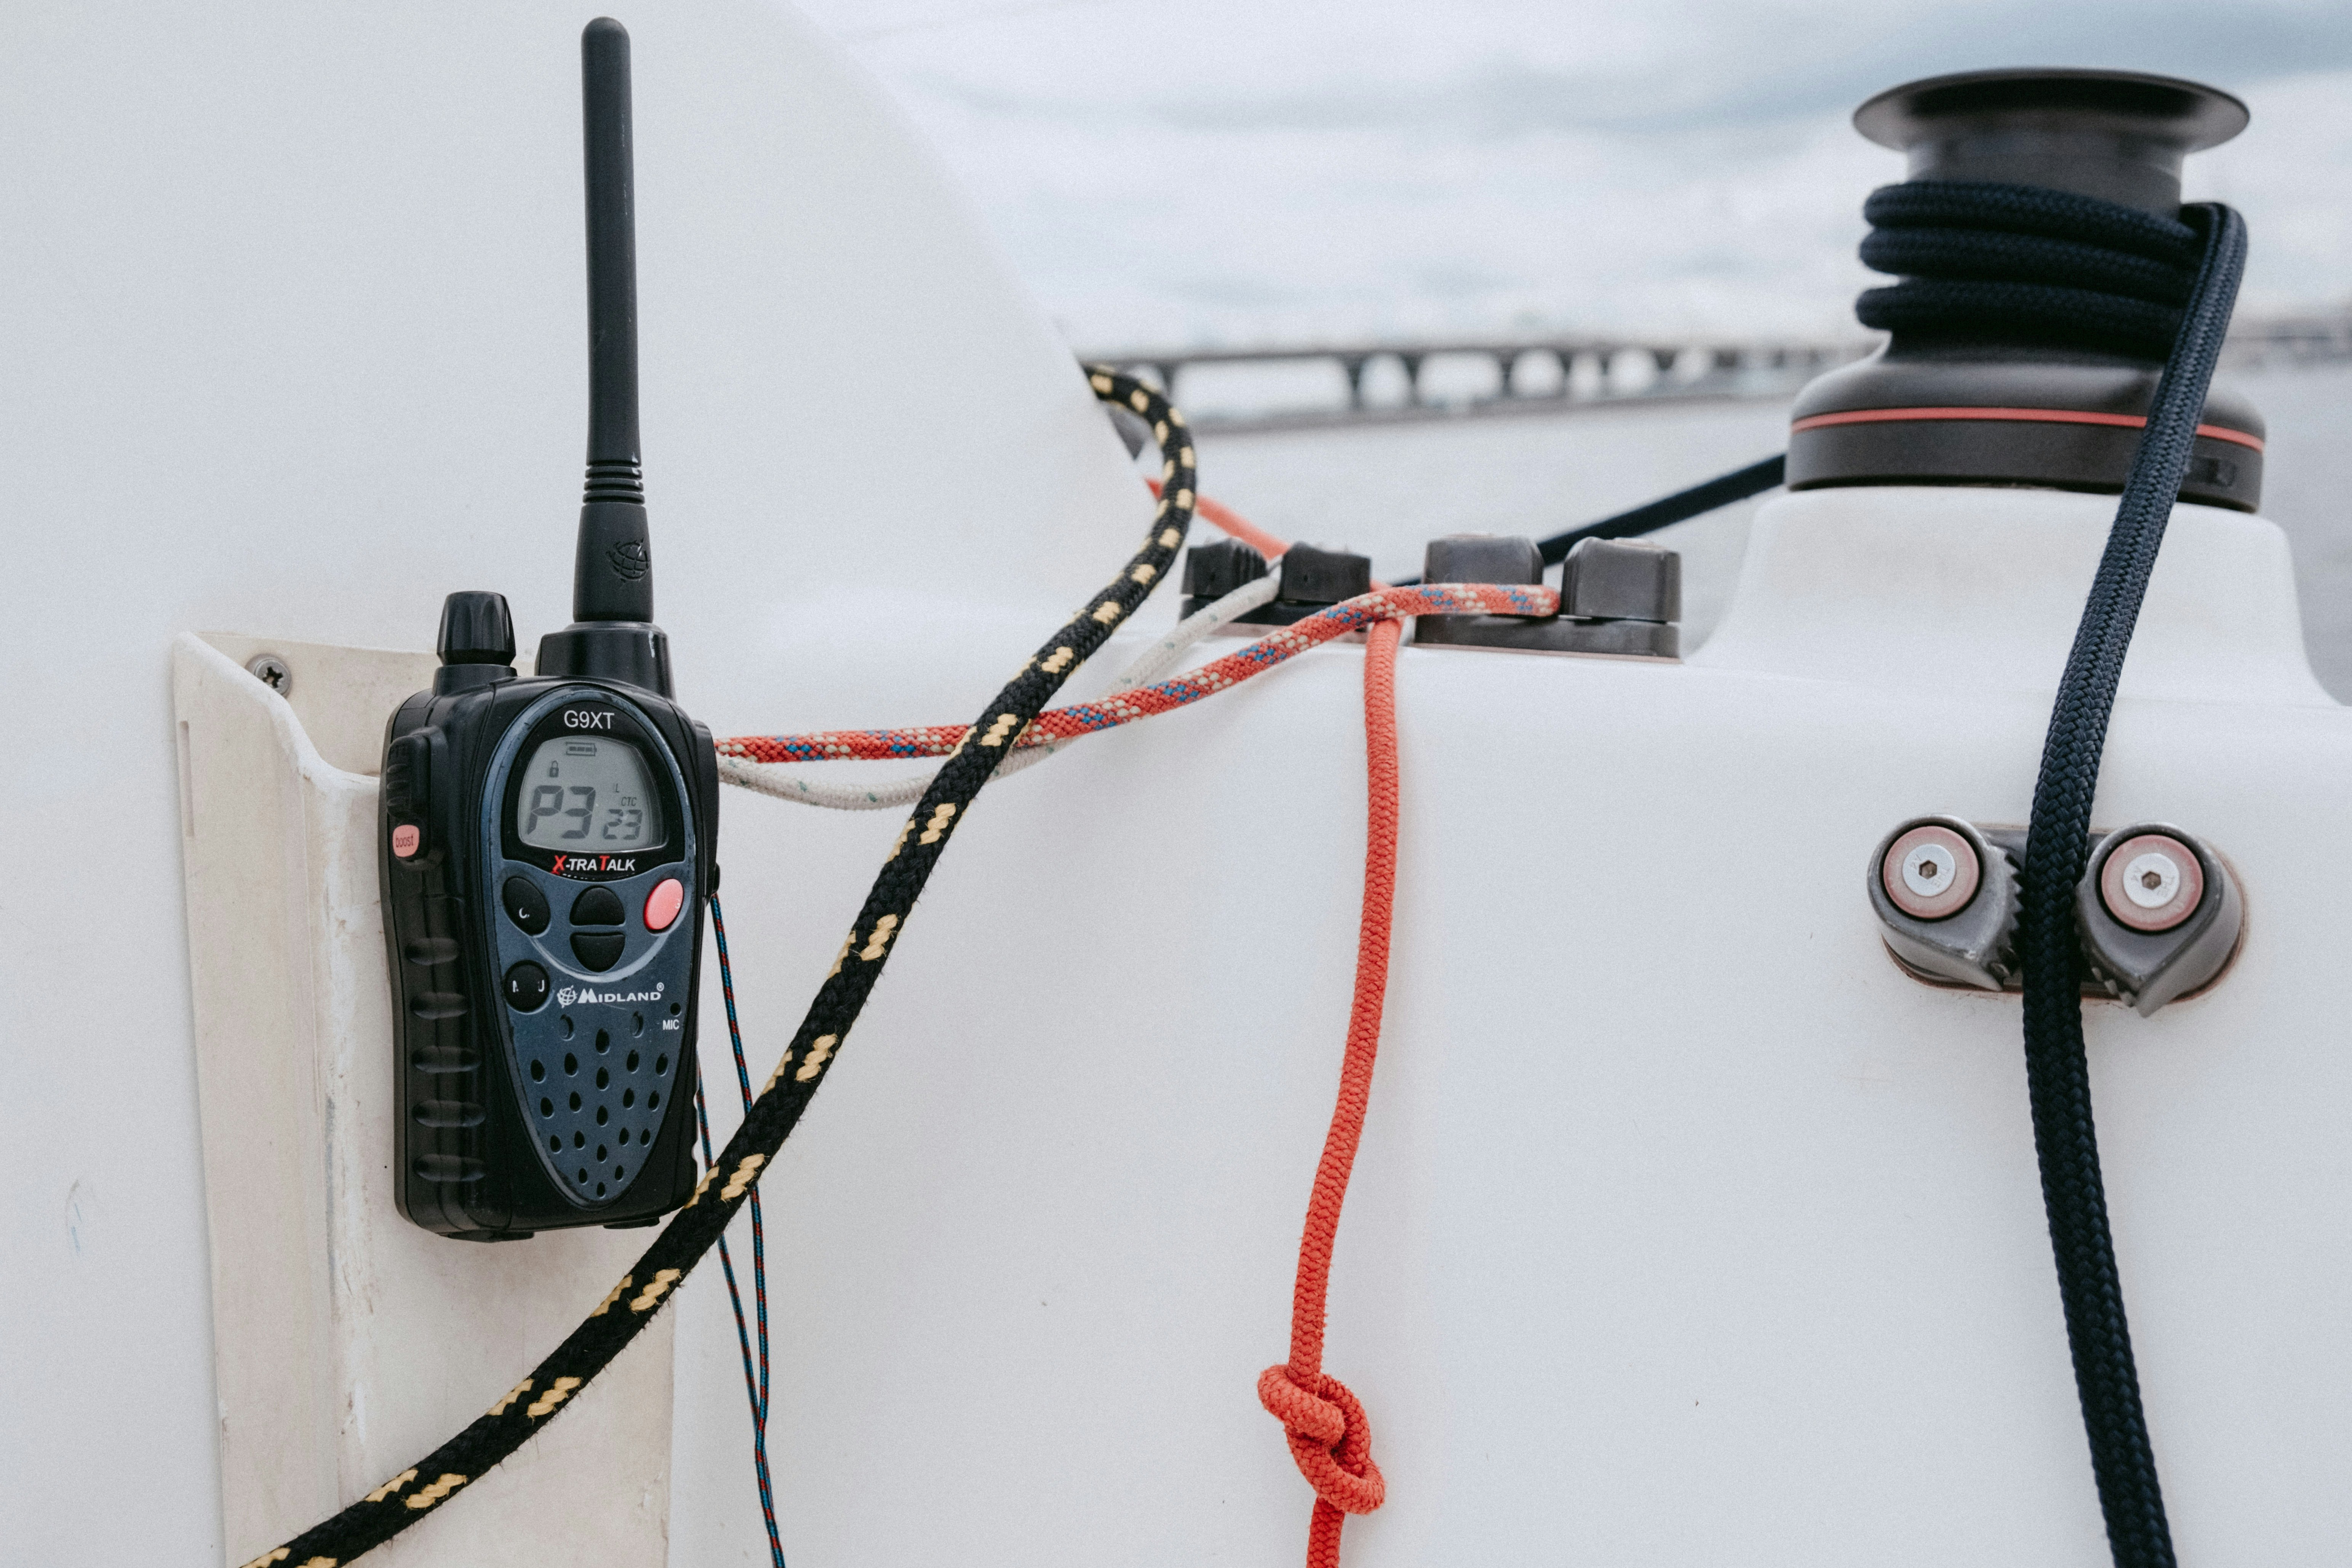 A good quality radio is an essential piece of equipment on a yacht